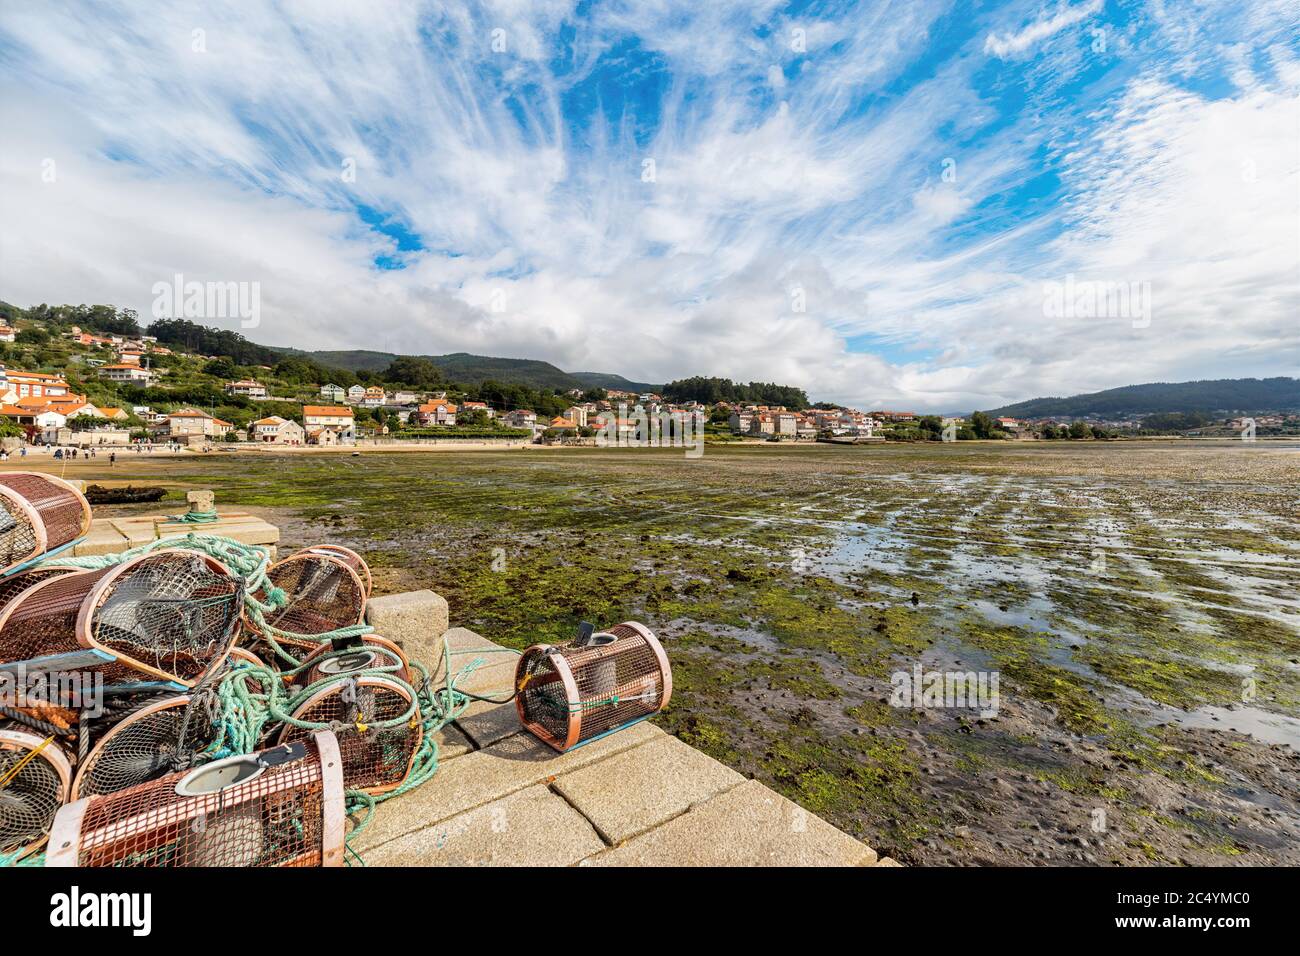 Fishing village of Combarro. Tourism in Galicia. The most beautiful spots in Spain. Stock Photo